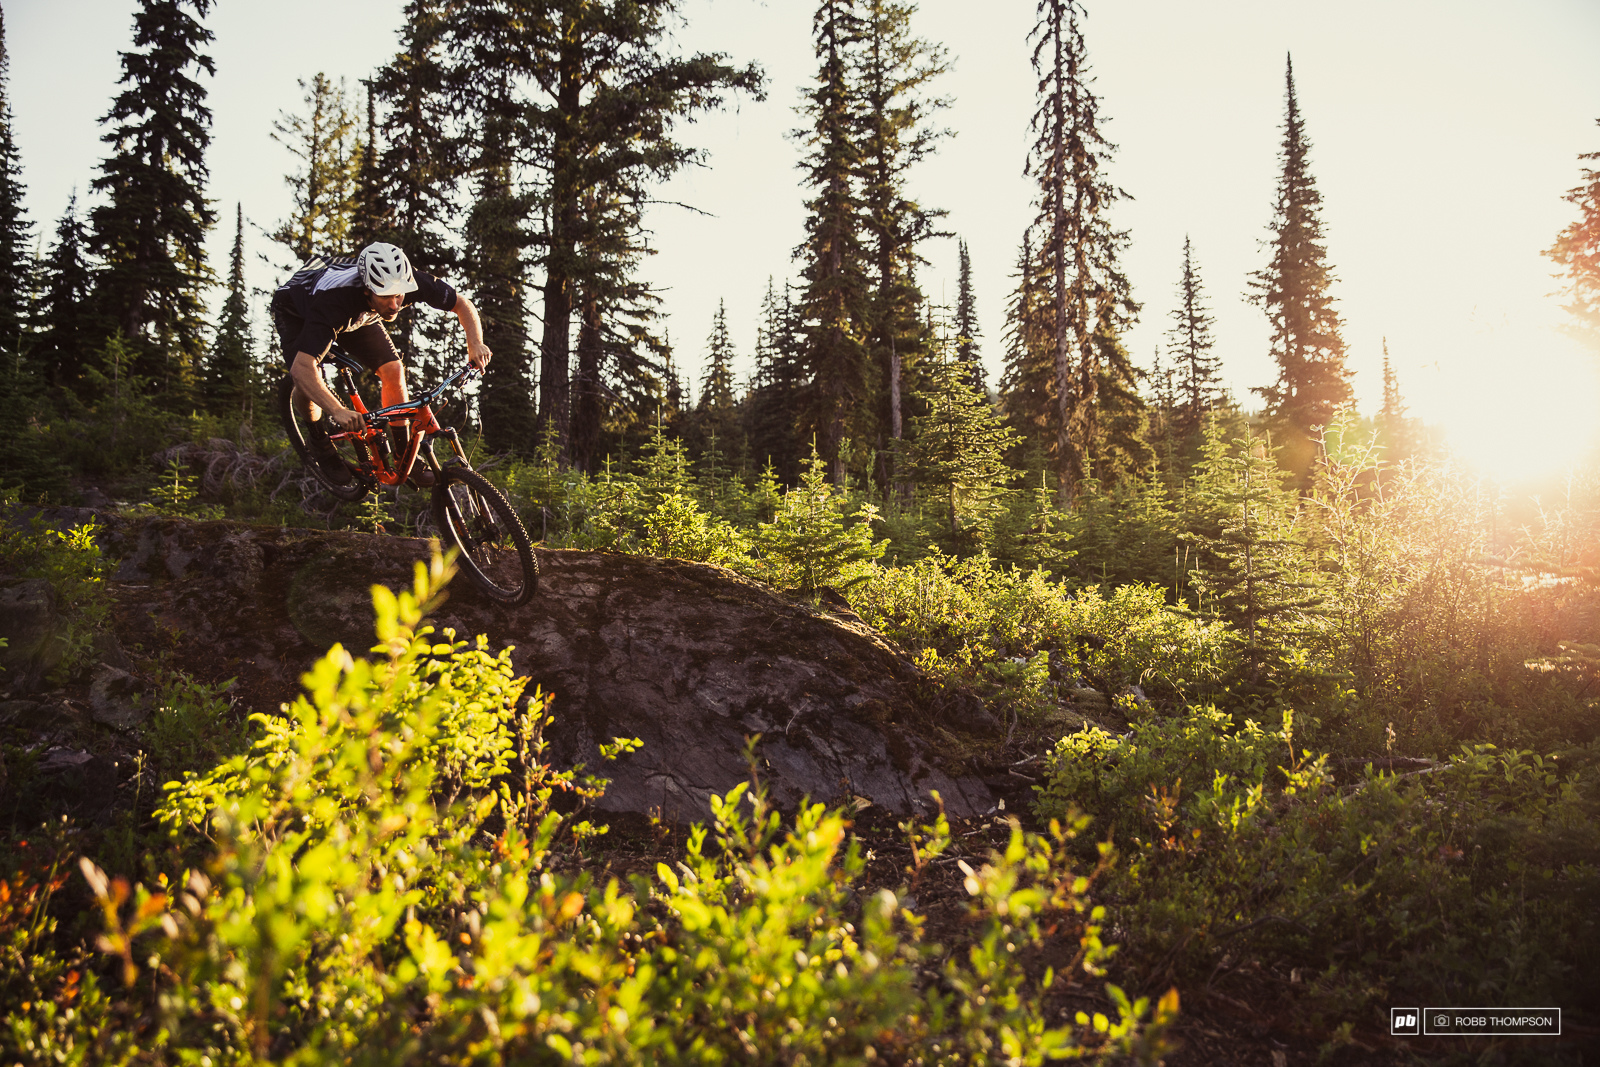 Bas van Steenbergen rolling a section of Rock Is The New Berm found in the Sovereign Lake area on Silver Star Mountain.